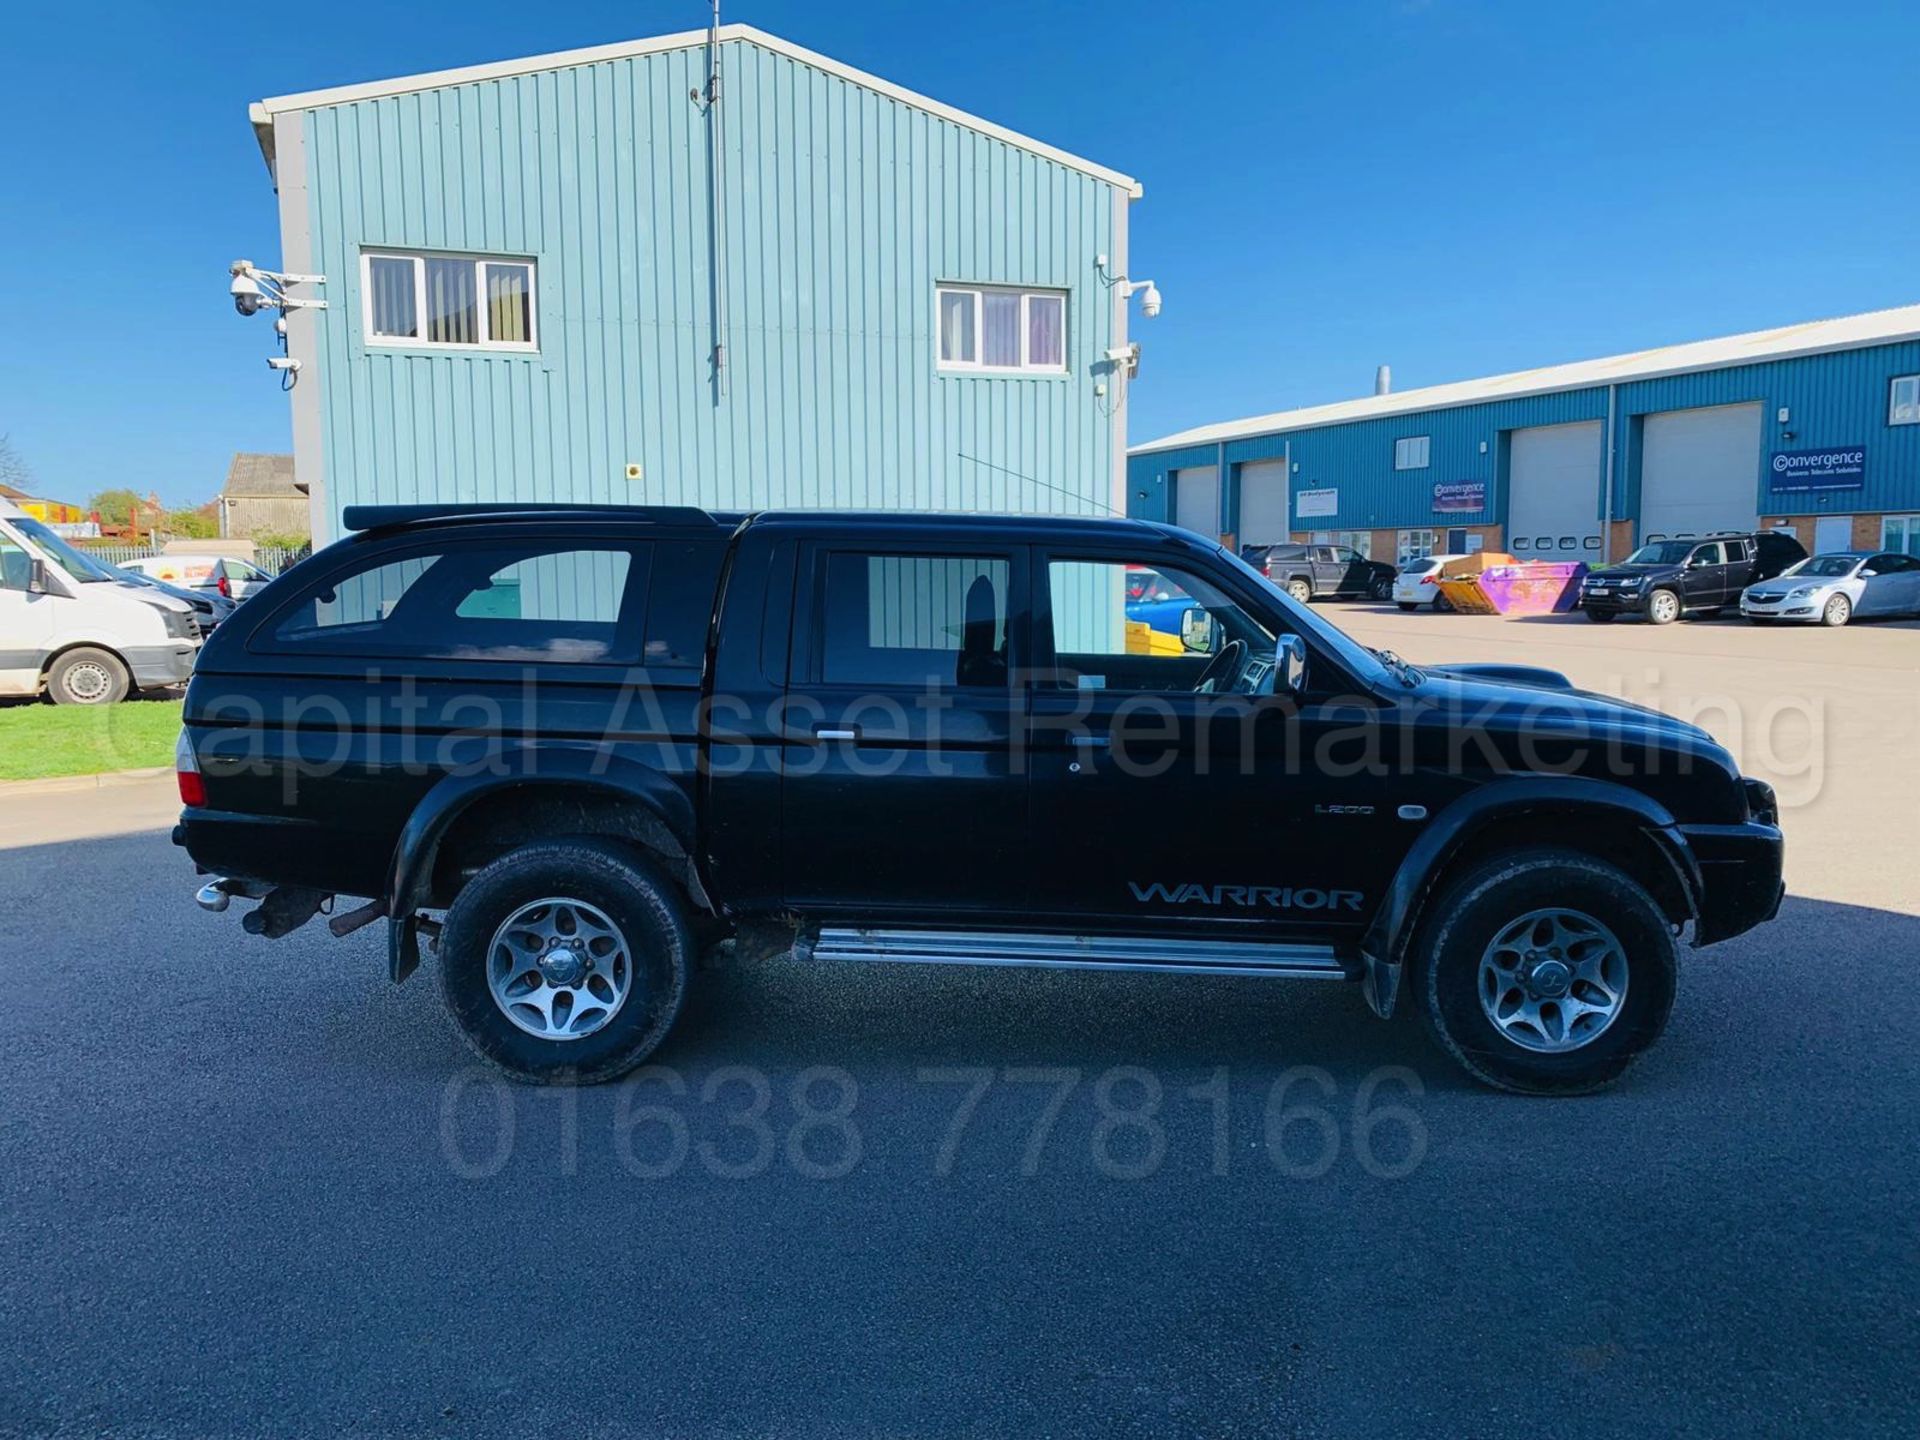 (On Sale) MITSUBISHI L200 *WARRIOR* D/CAB PICK-UP (2004) '2.5 DIESEL - 5 SPEED' *AIR CON - LEATHER* - Image 9 of 26